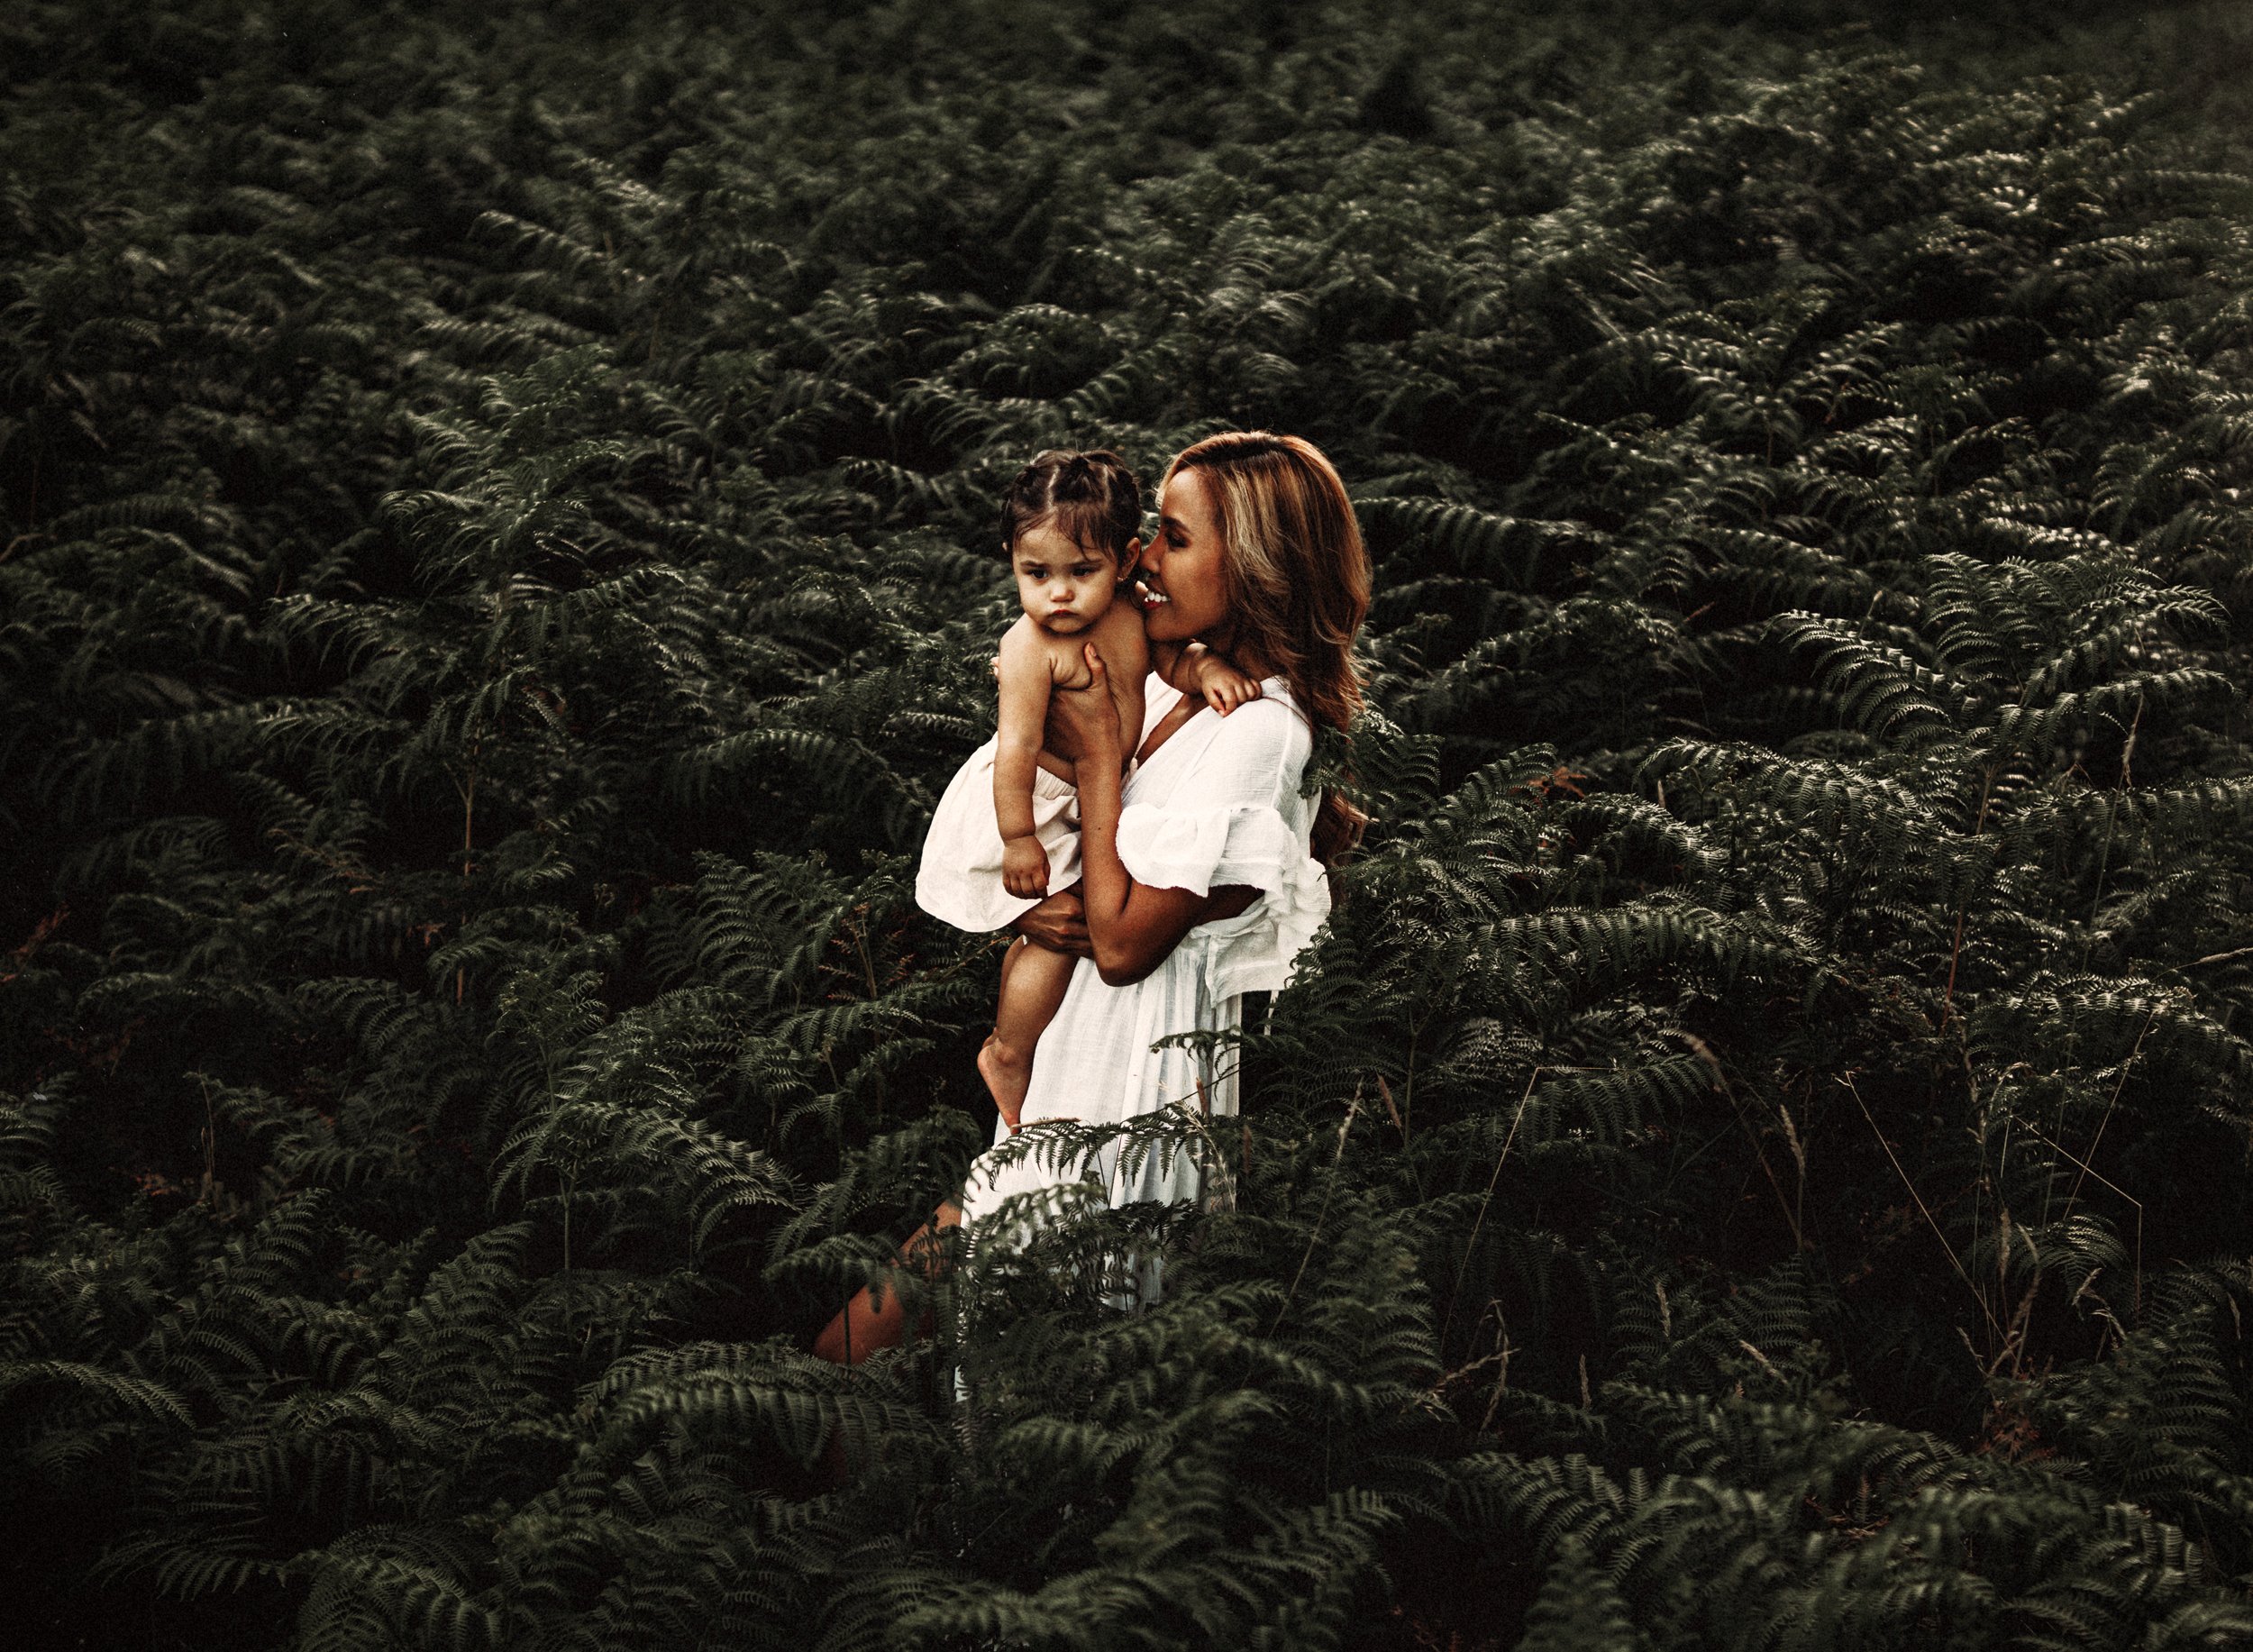 emotive-motherhood-photo-session-with-mother-and-daughter-in-a-patch-of-ferns-at-sunset-in-landtuhl-kmc-germany (2).jpg